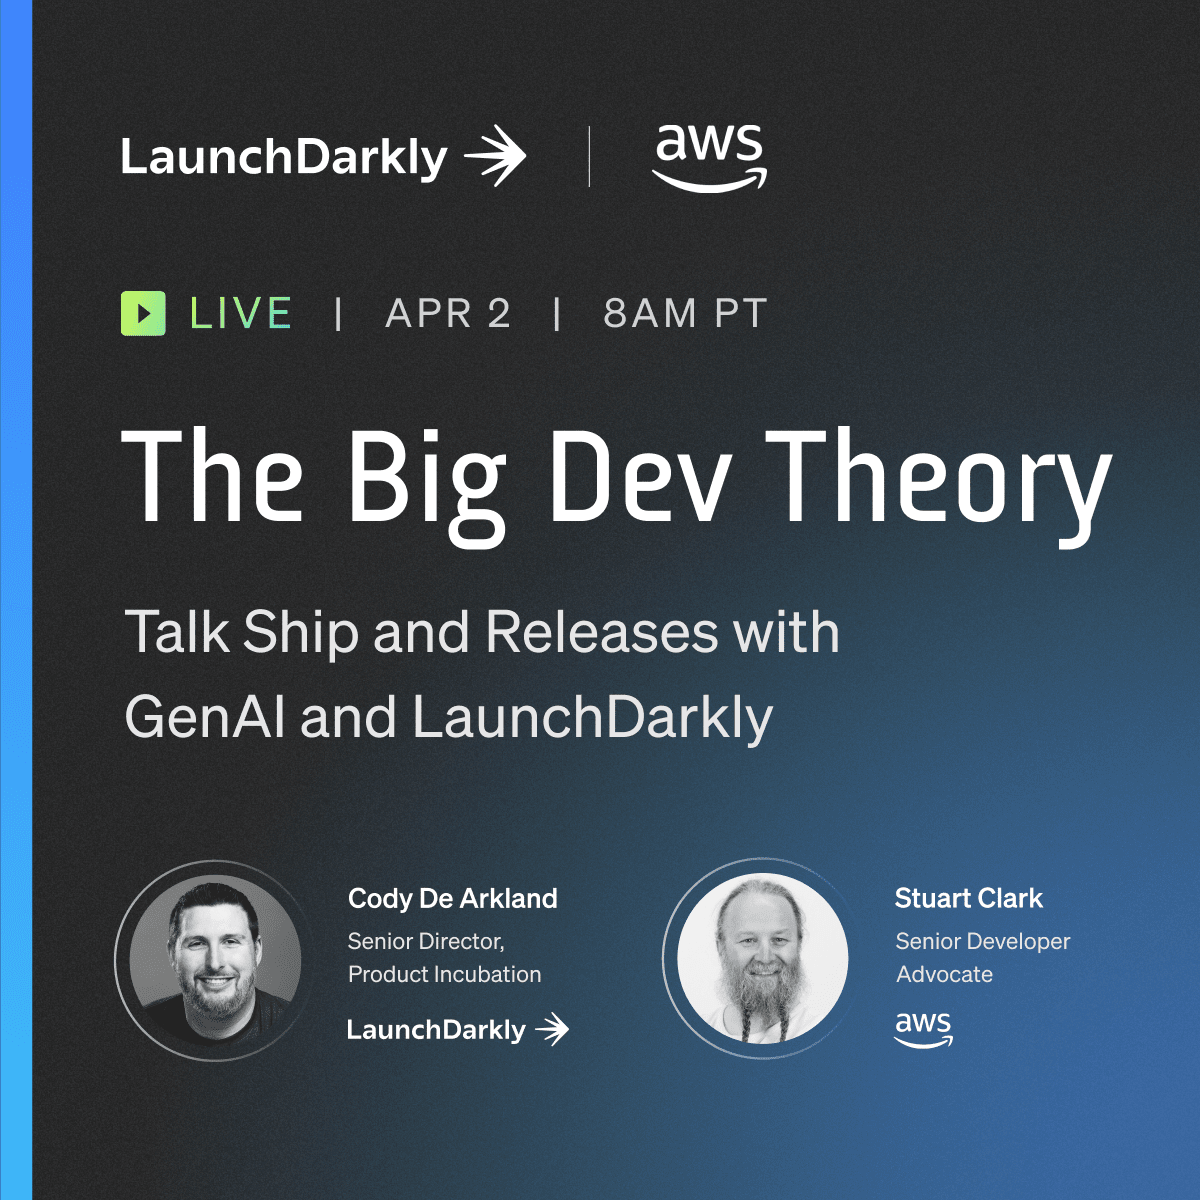 We're LIVE in 10 minutes!! ⏰ Catch us talking ship and releases with #GenAI and LaunchDarkly on @AWS_Partners's The Big Dev Theory! Join the stream! 🎧👇 twitch.tv/aws/